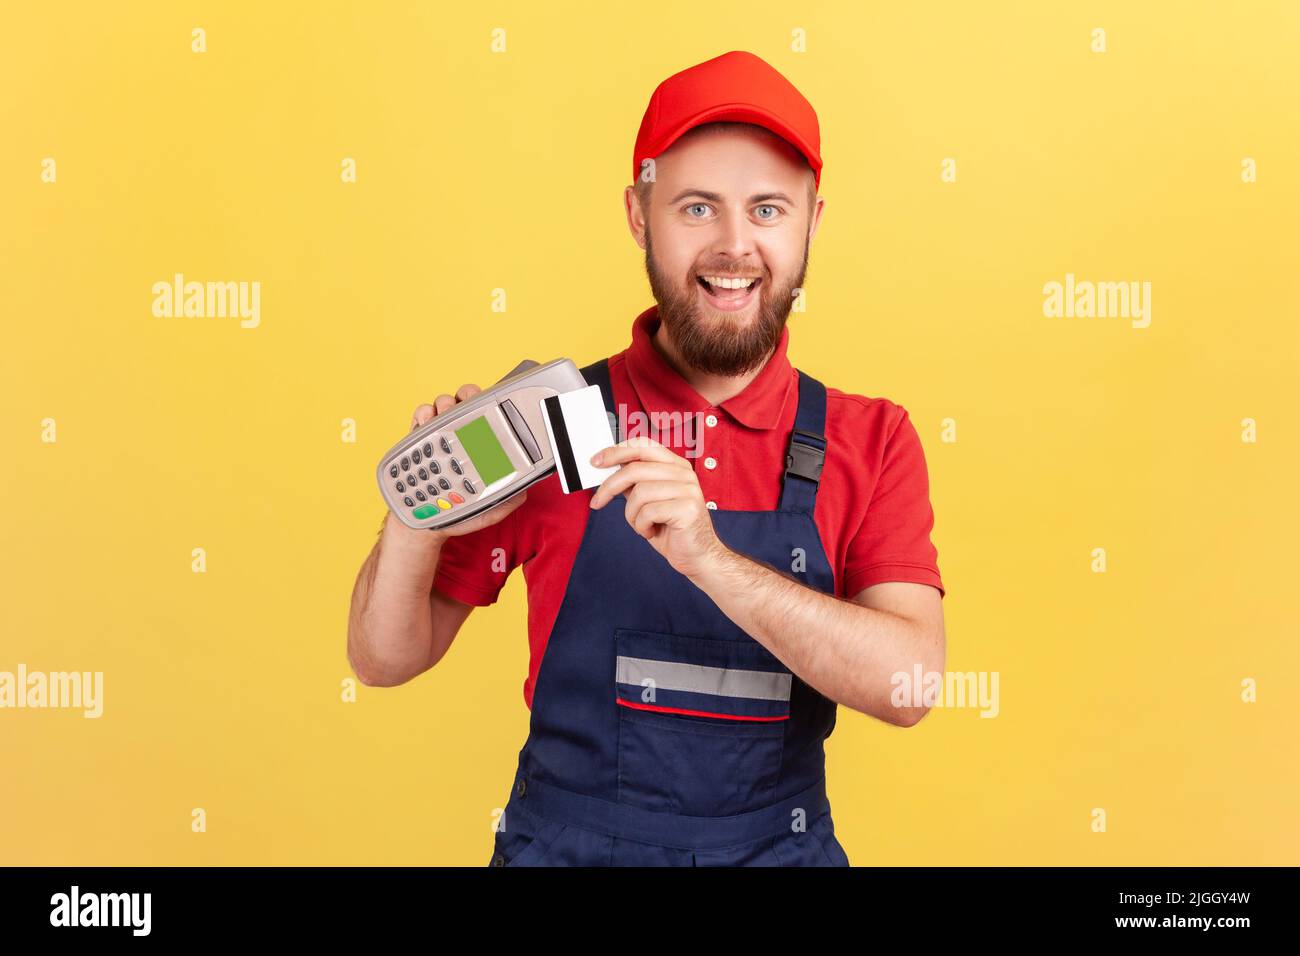 Excited joyful bearded worker man holding pos terminal for contactless payment and credit card, paying for service, expressing happiness. Indoor studio shot isolated on yellow background. Stock Photo